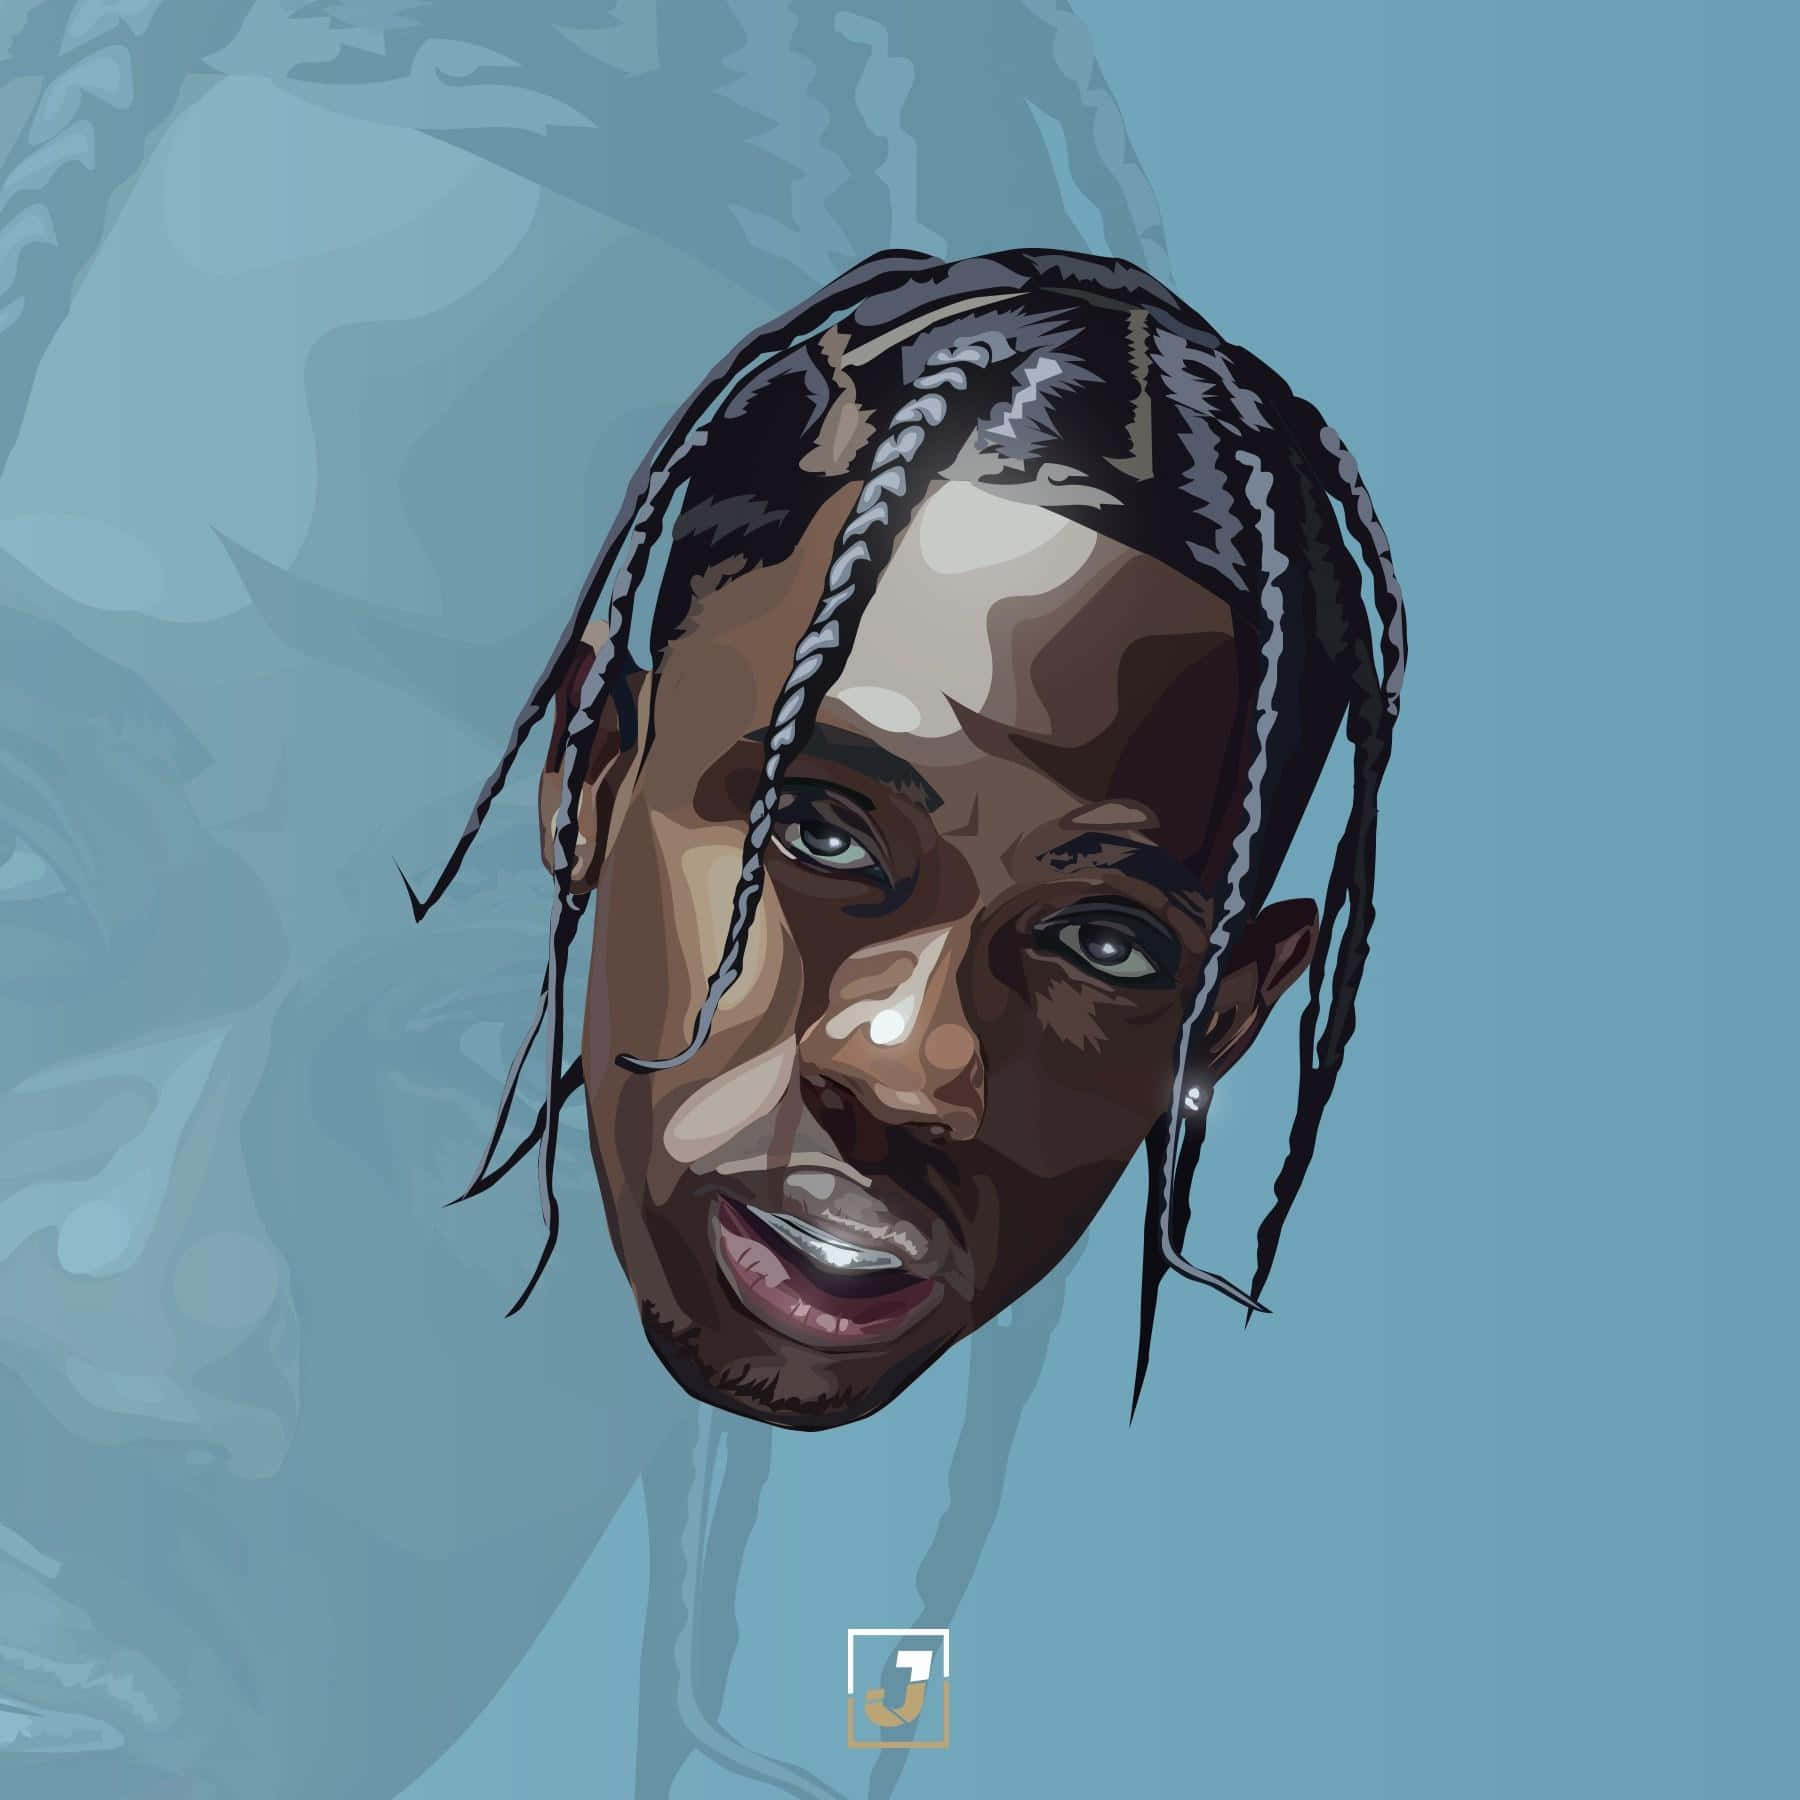 Get Ready for the High Flying Adventure of Travis Scott's Music Wallpaper